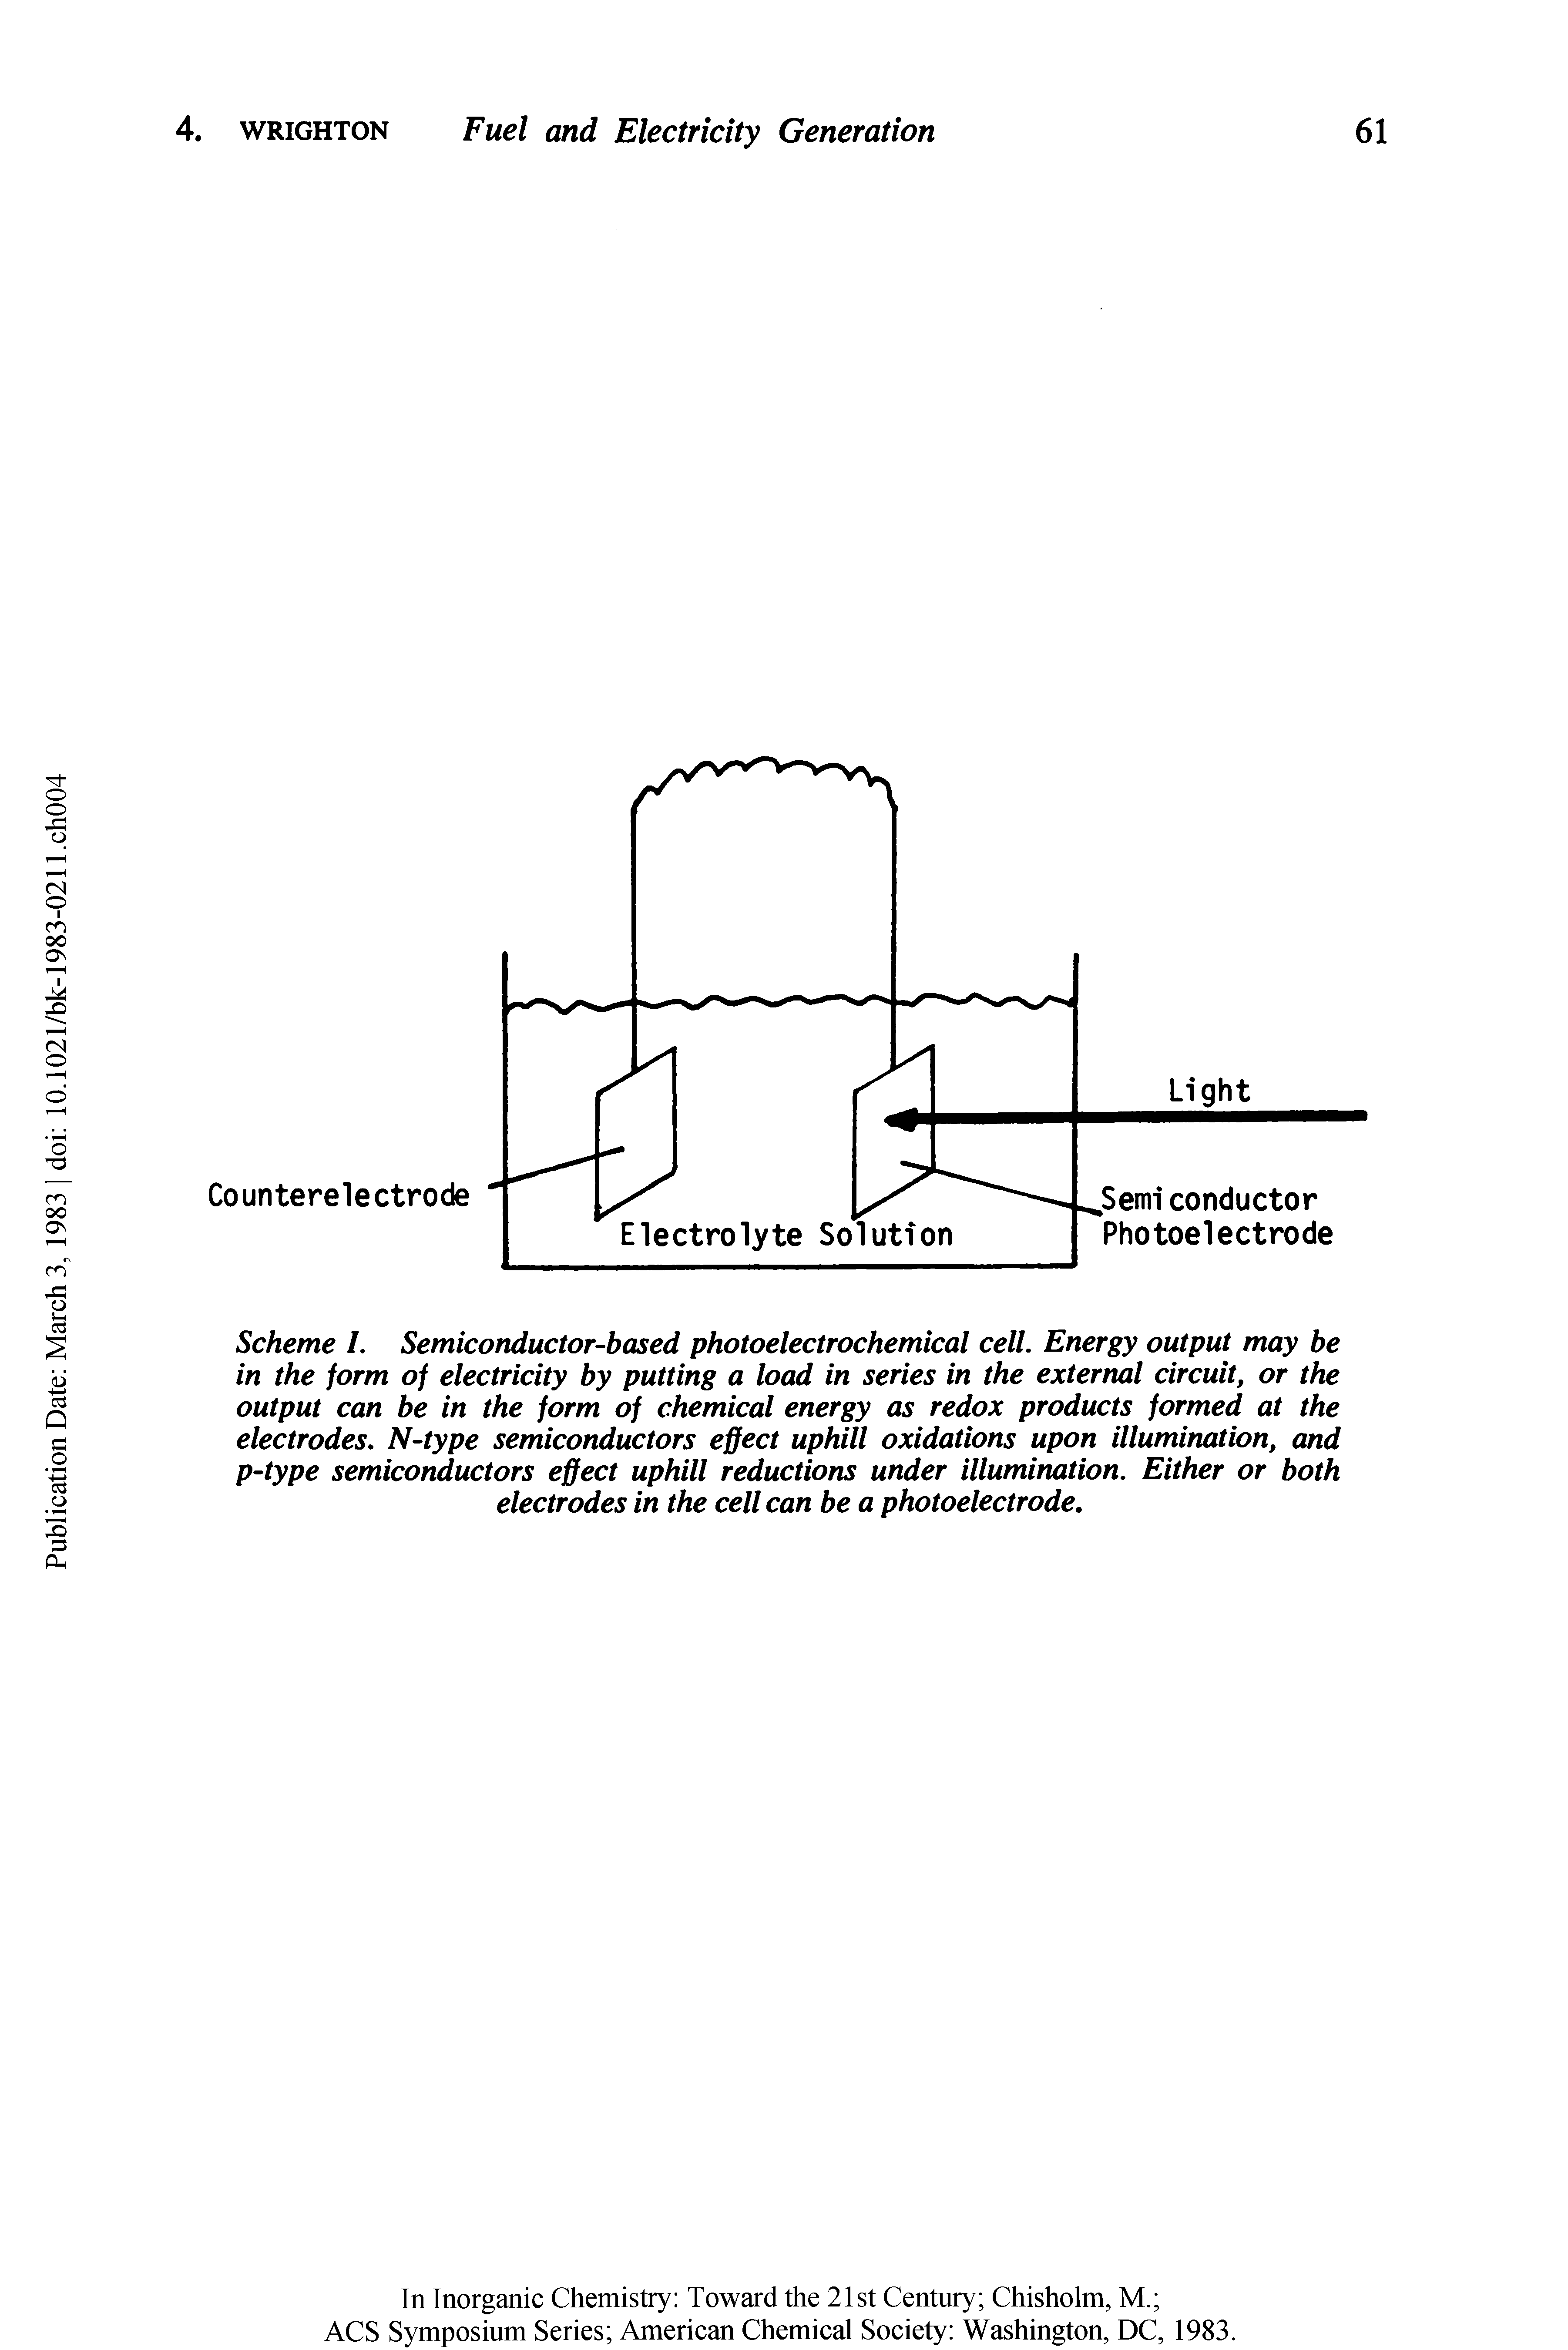 Scheme I. Semiconductor-based photoelectrochemical cell. Energy output may be in the form of electricity by putting a load in series in the external circuit, or the output can be in the form of chemical energy as redox products formed at the electrodes. N-type semiconductors effect uphill oxidations upon illumination, and p-type semiconductors effect uphill reductions under illumination. Either or both electrodes in the cell can be a photoelectrode.